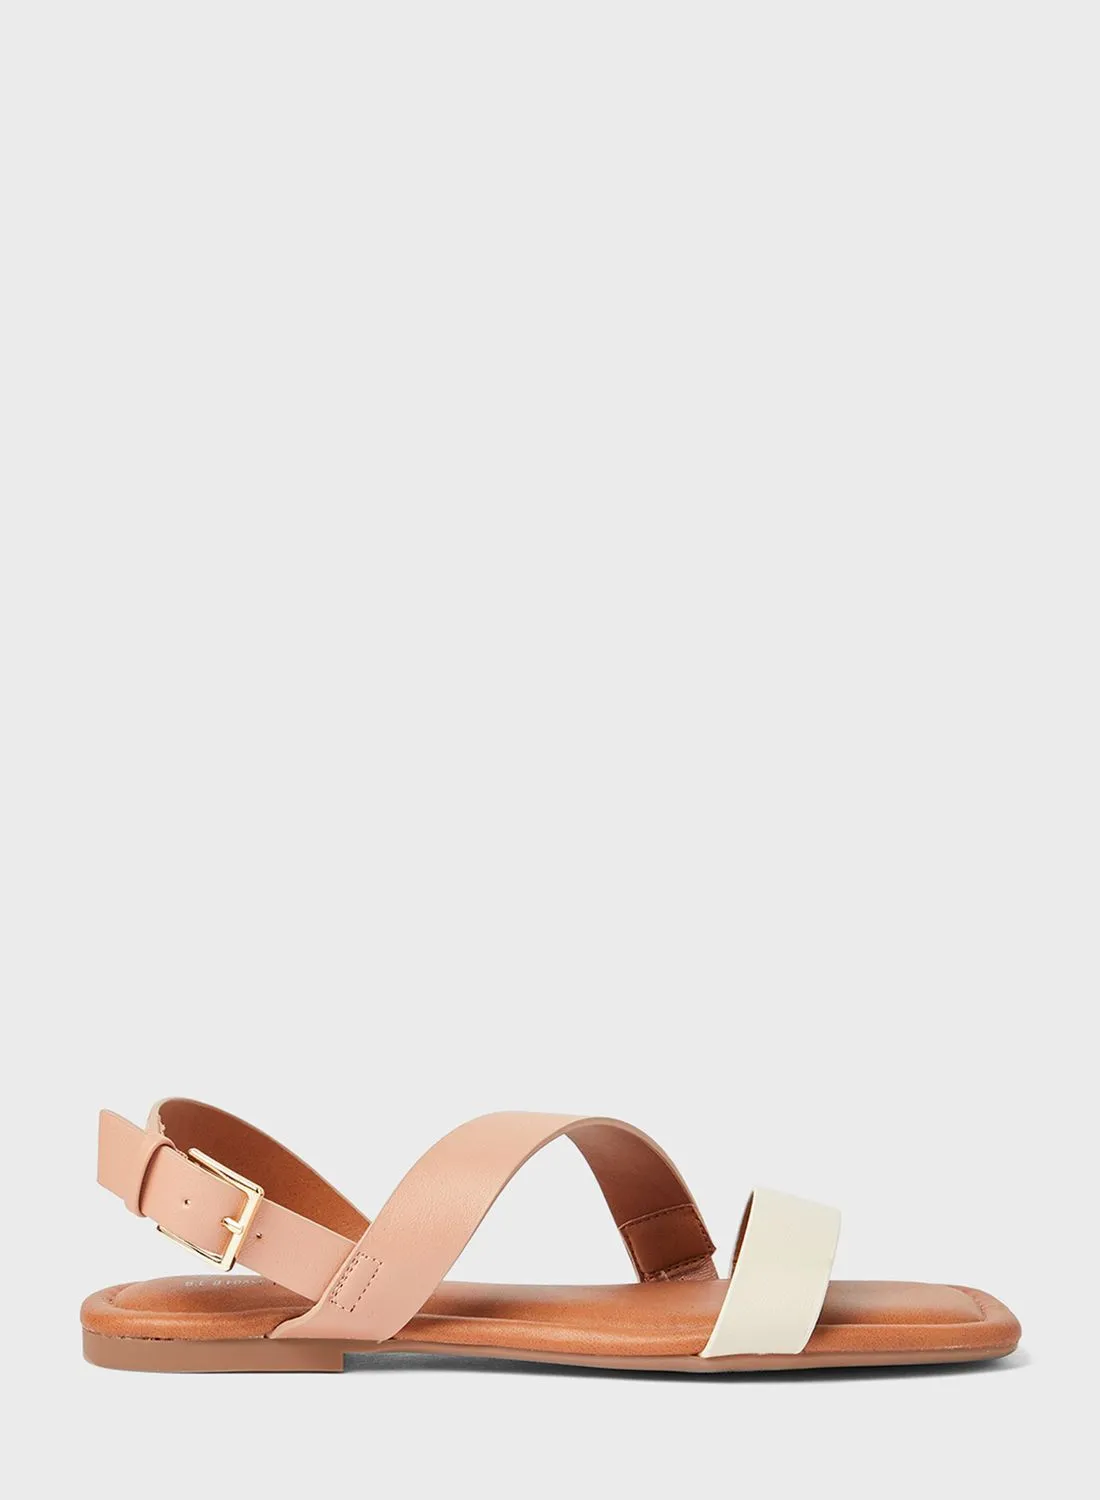 CALL IT SPRING Iggy Buckle Flat Sandals